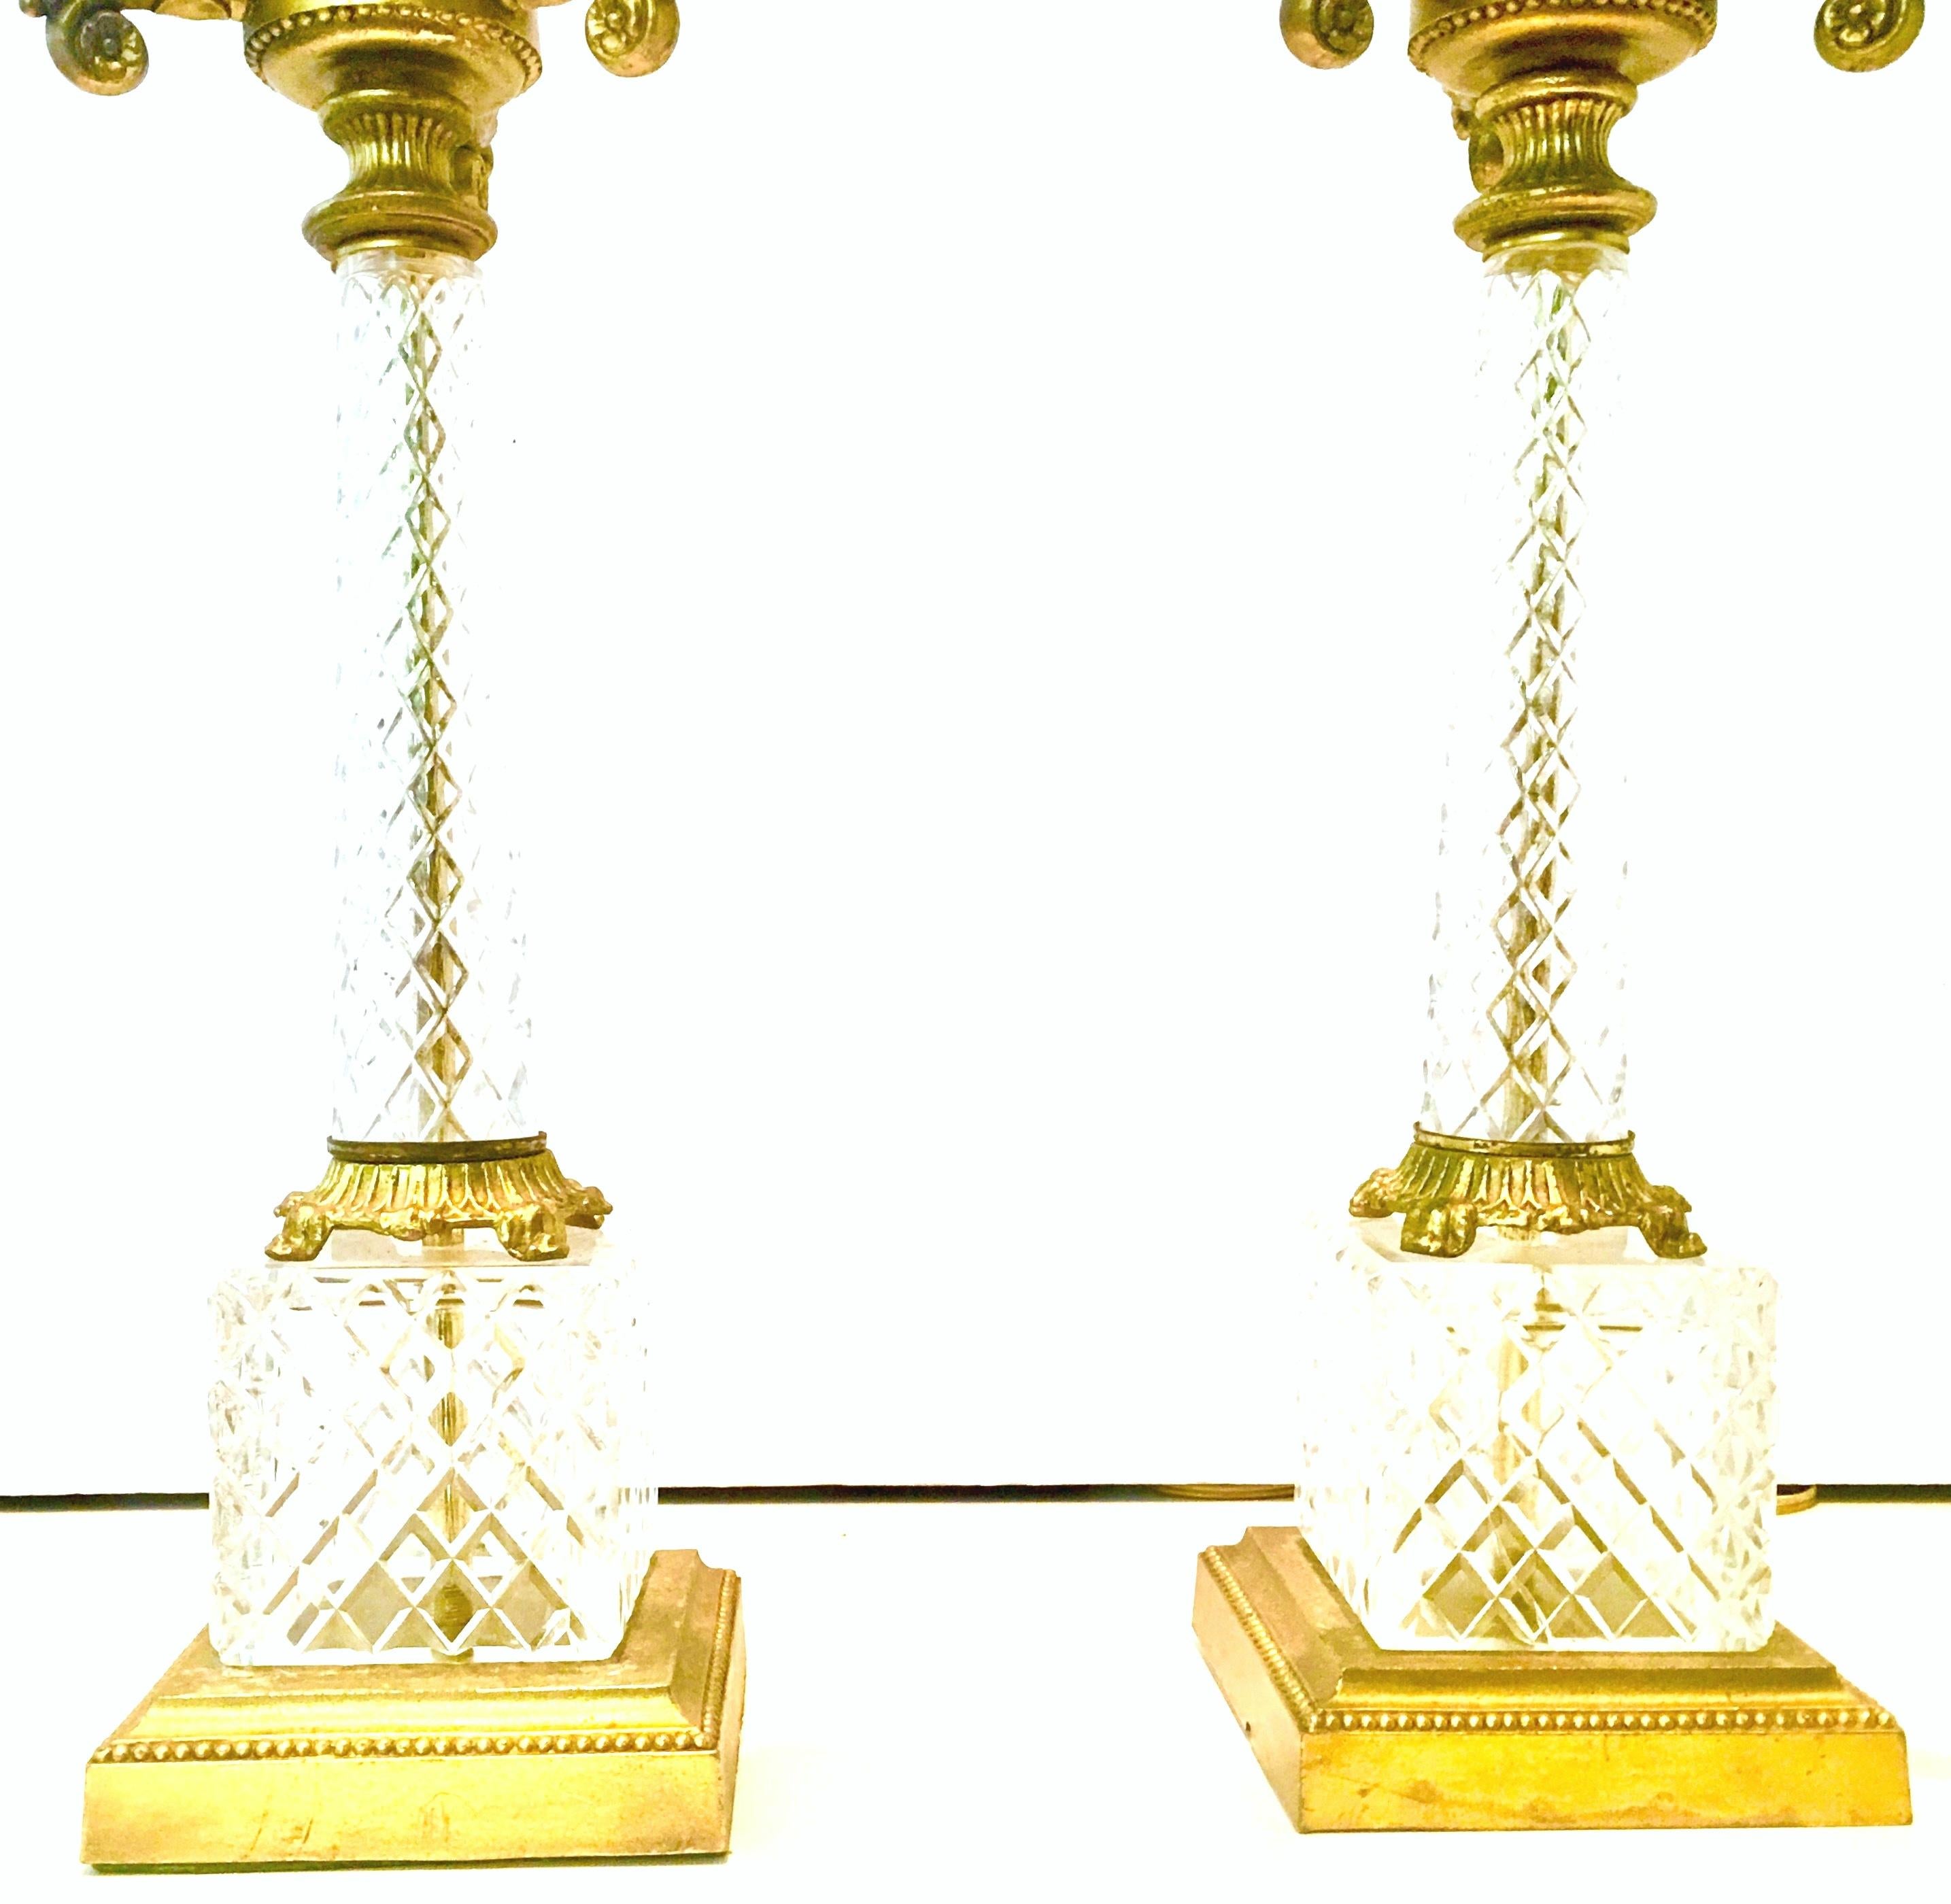 20th century French style, three-light candelabra diamond cut crystal and gilt bronze mount table lamps. Features clear diamond cut crystal bodies with a square gilt bronze bottom base and slender elegant necks. Decorative gilt bronze mounts